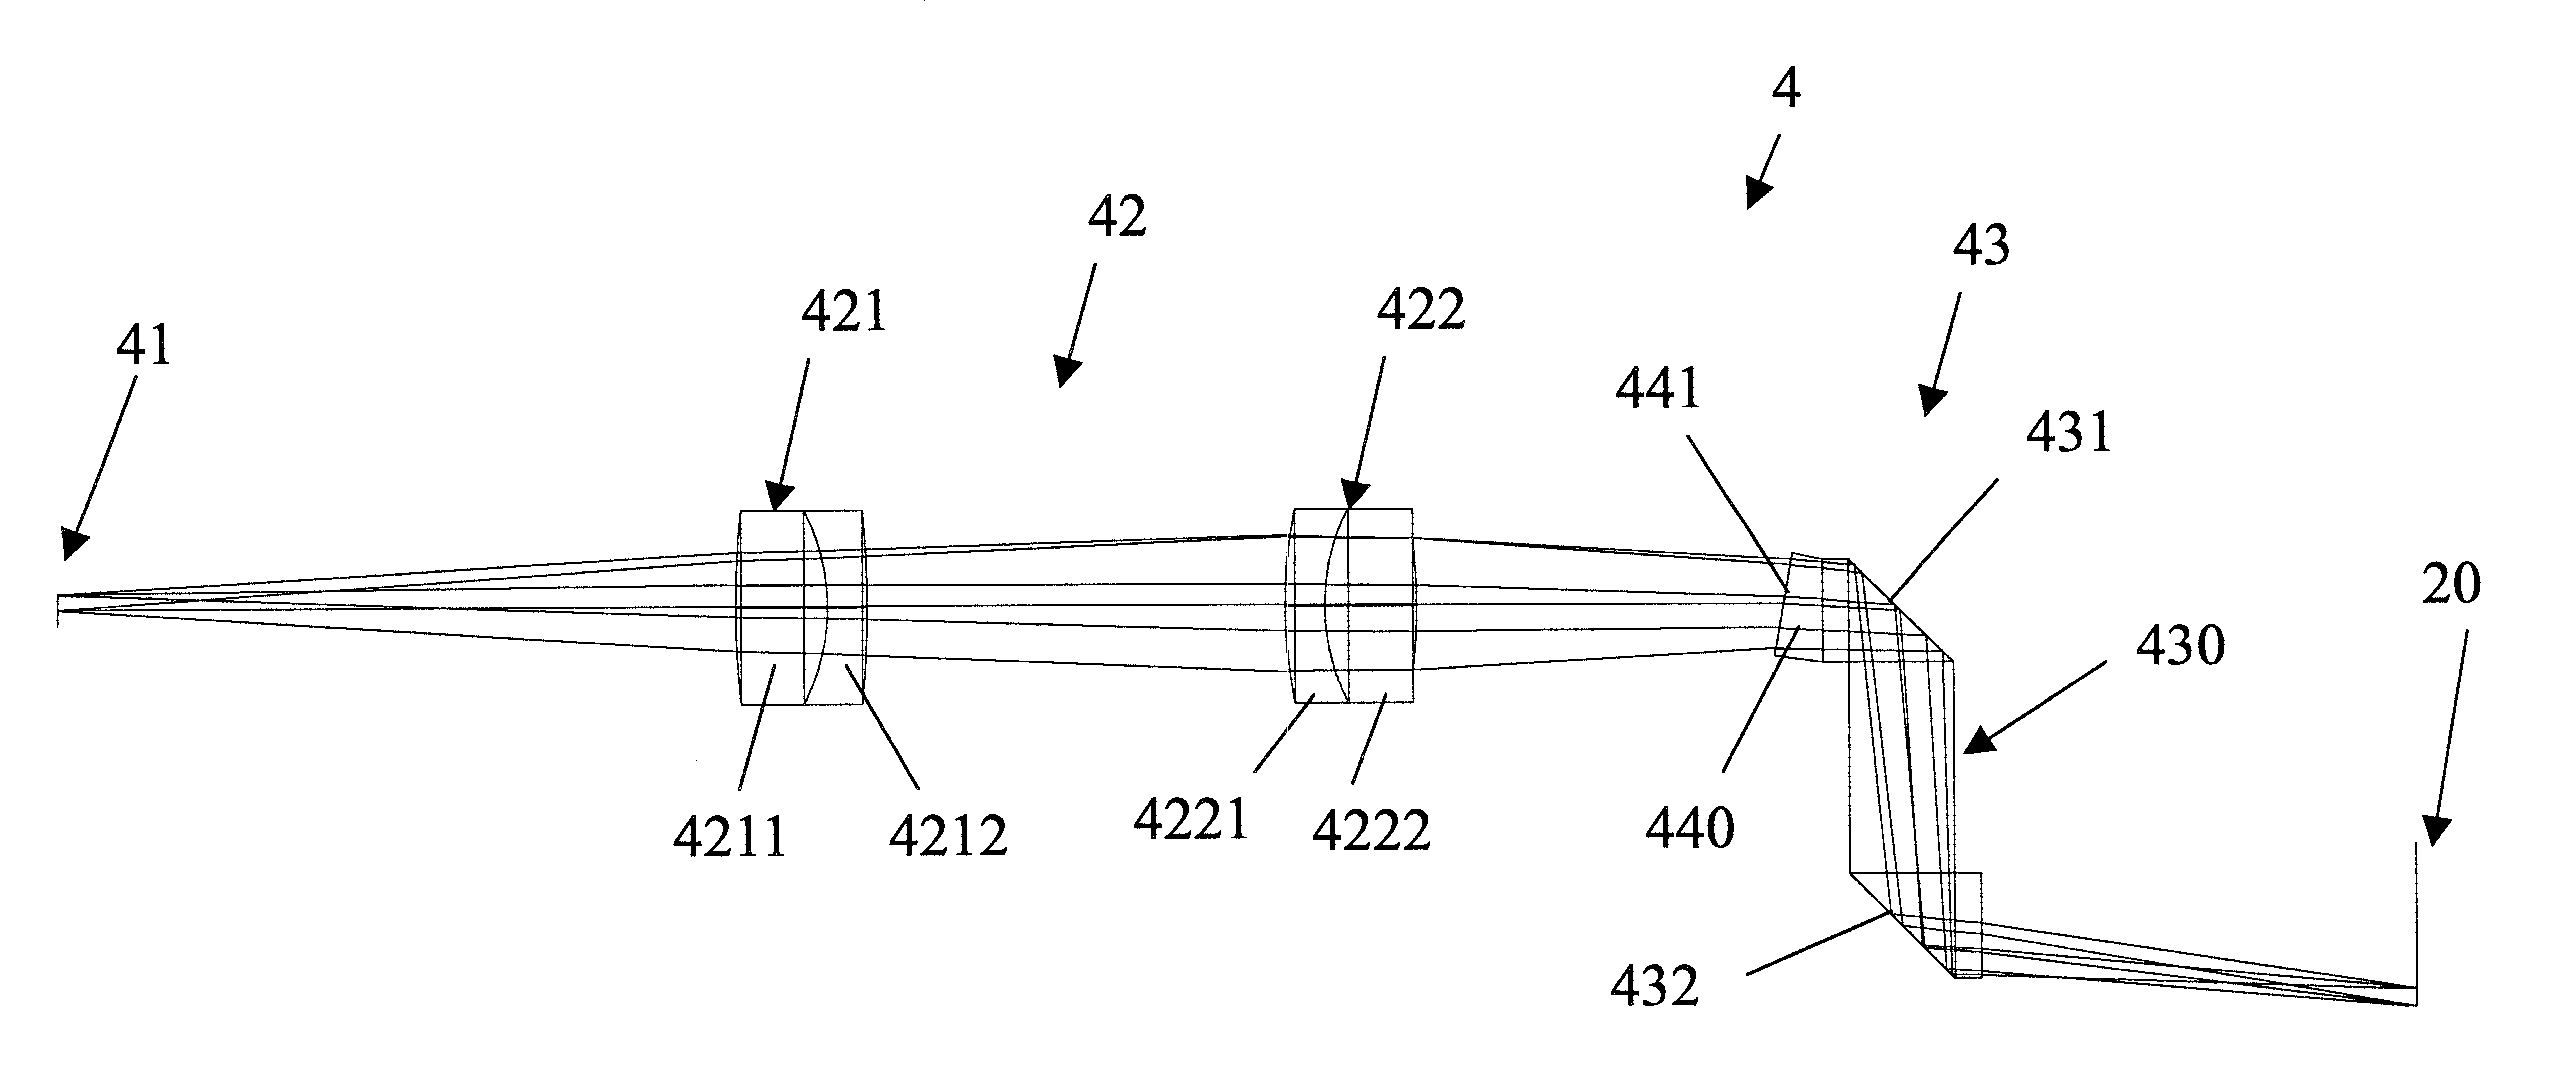 Display device for telescope system